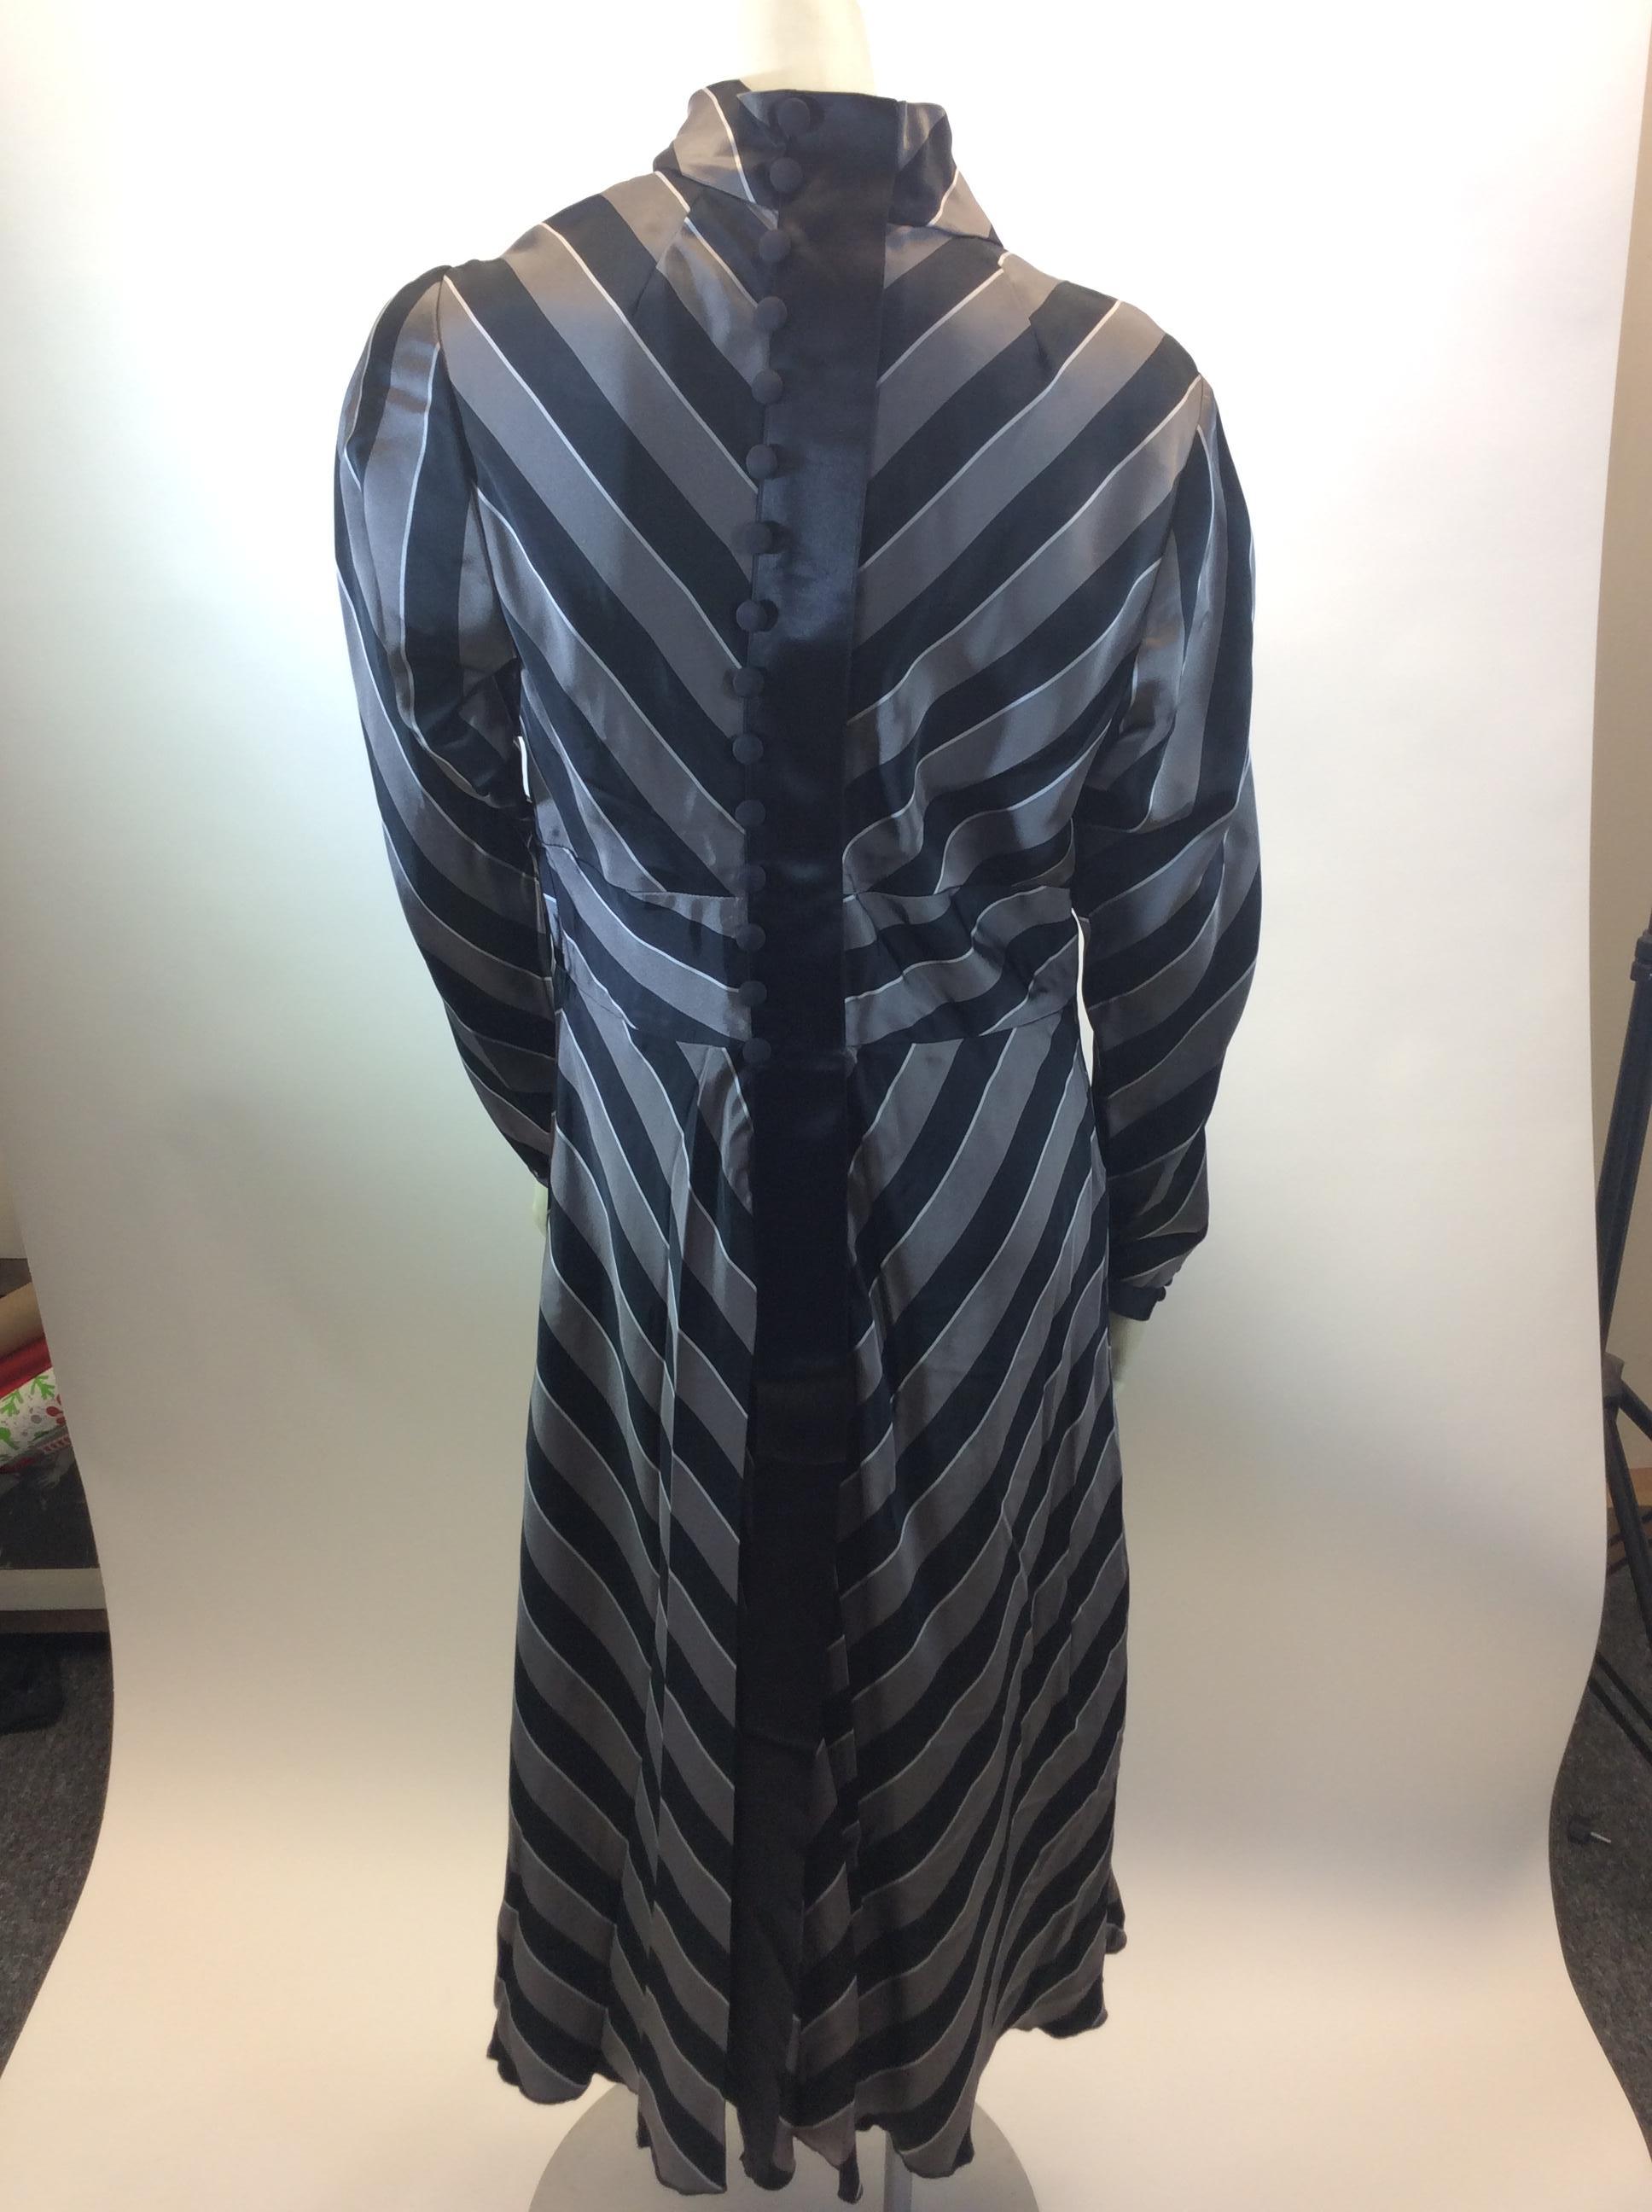 Marc Jacobs Black and Grey Stripe Dress NWT In New Condition For Sale In Narberth, PA